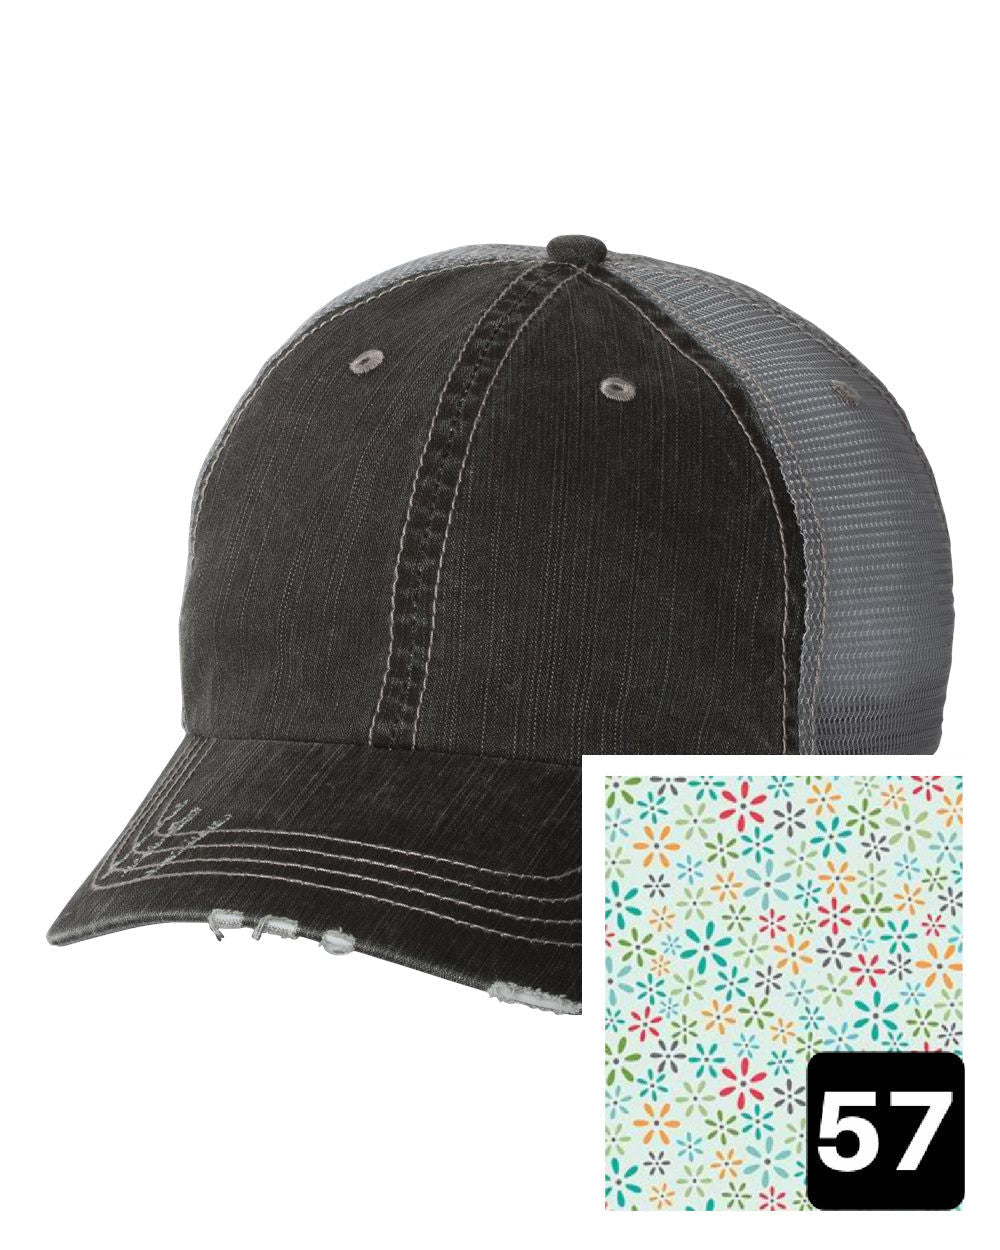 gray distressed trucker hat with white daisy on yellow fabric state of Georgia